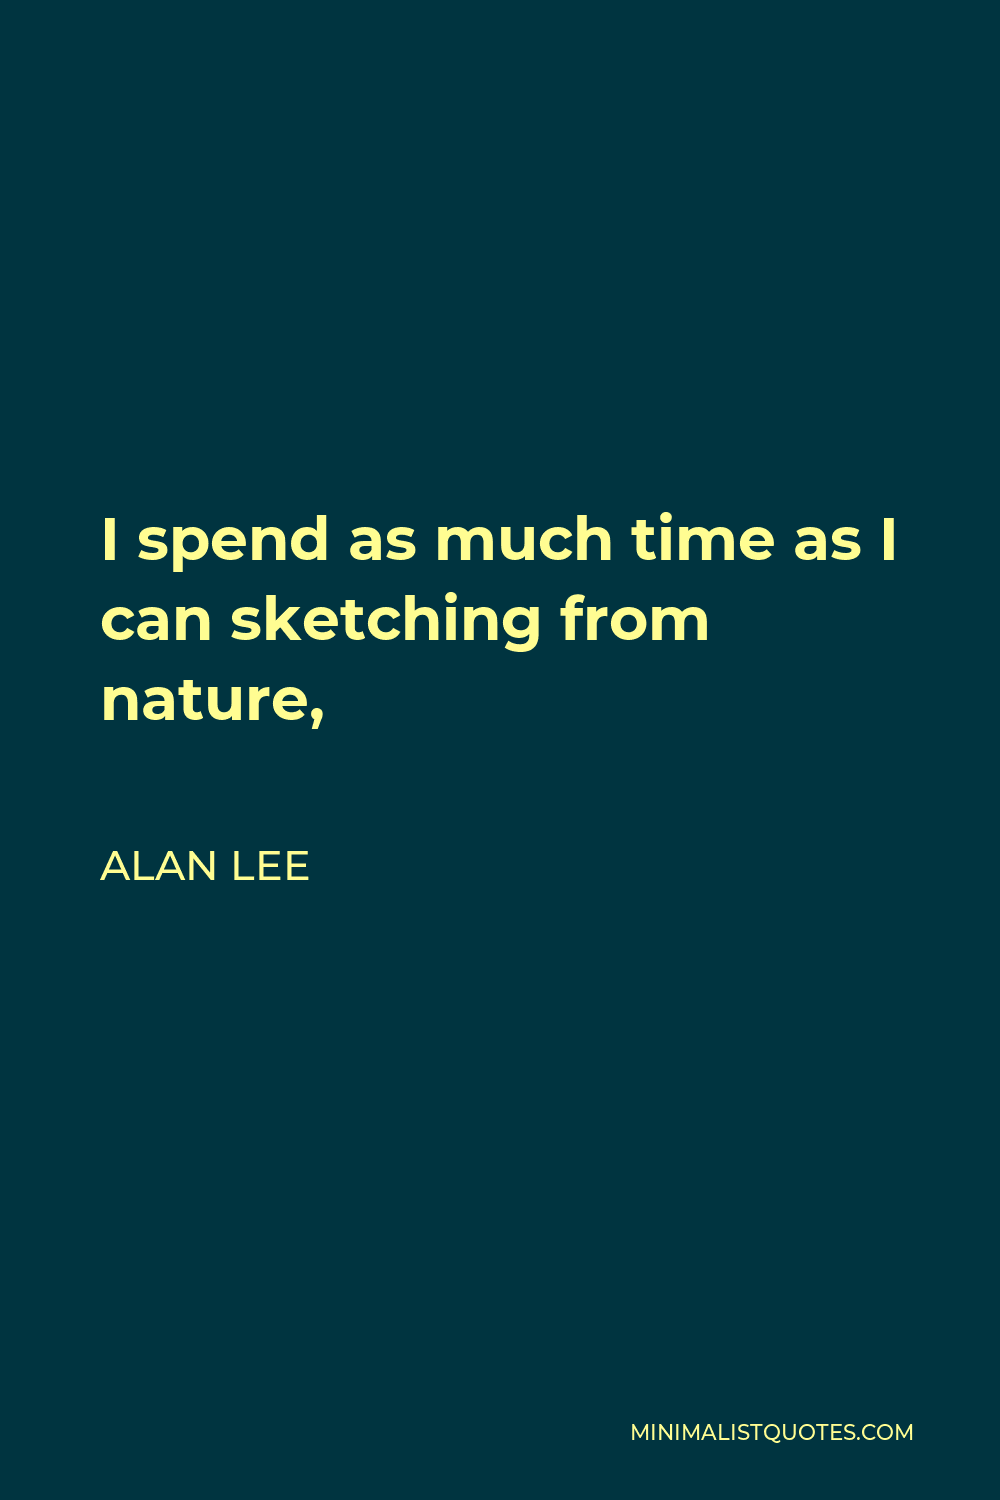 Alan Lee Quote - I spend as much time as I can sketching from nature,